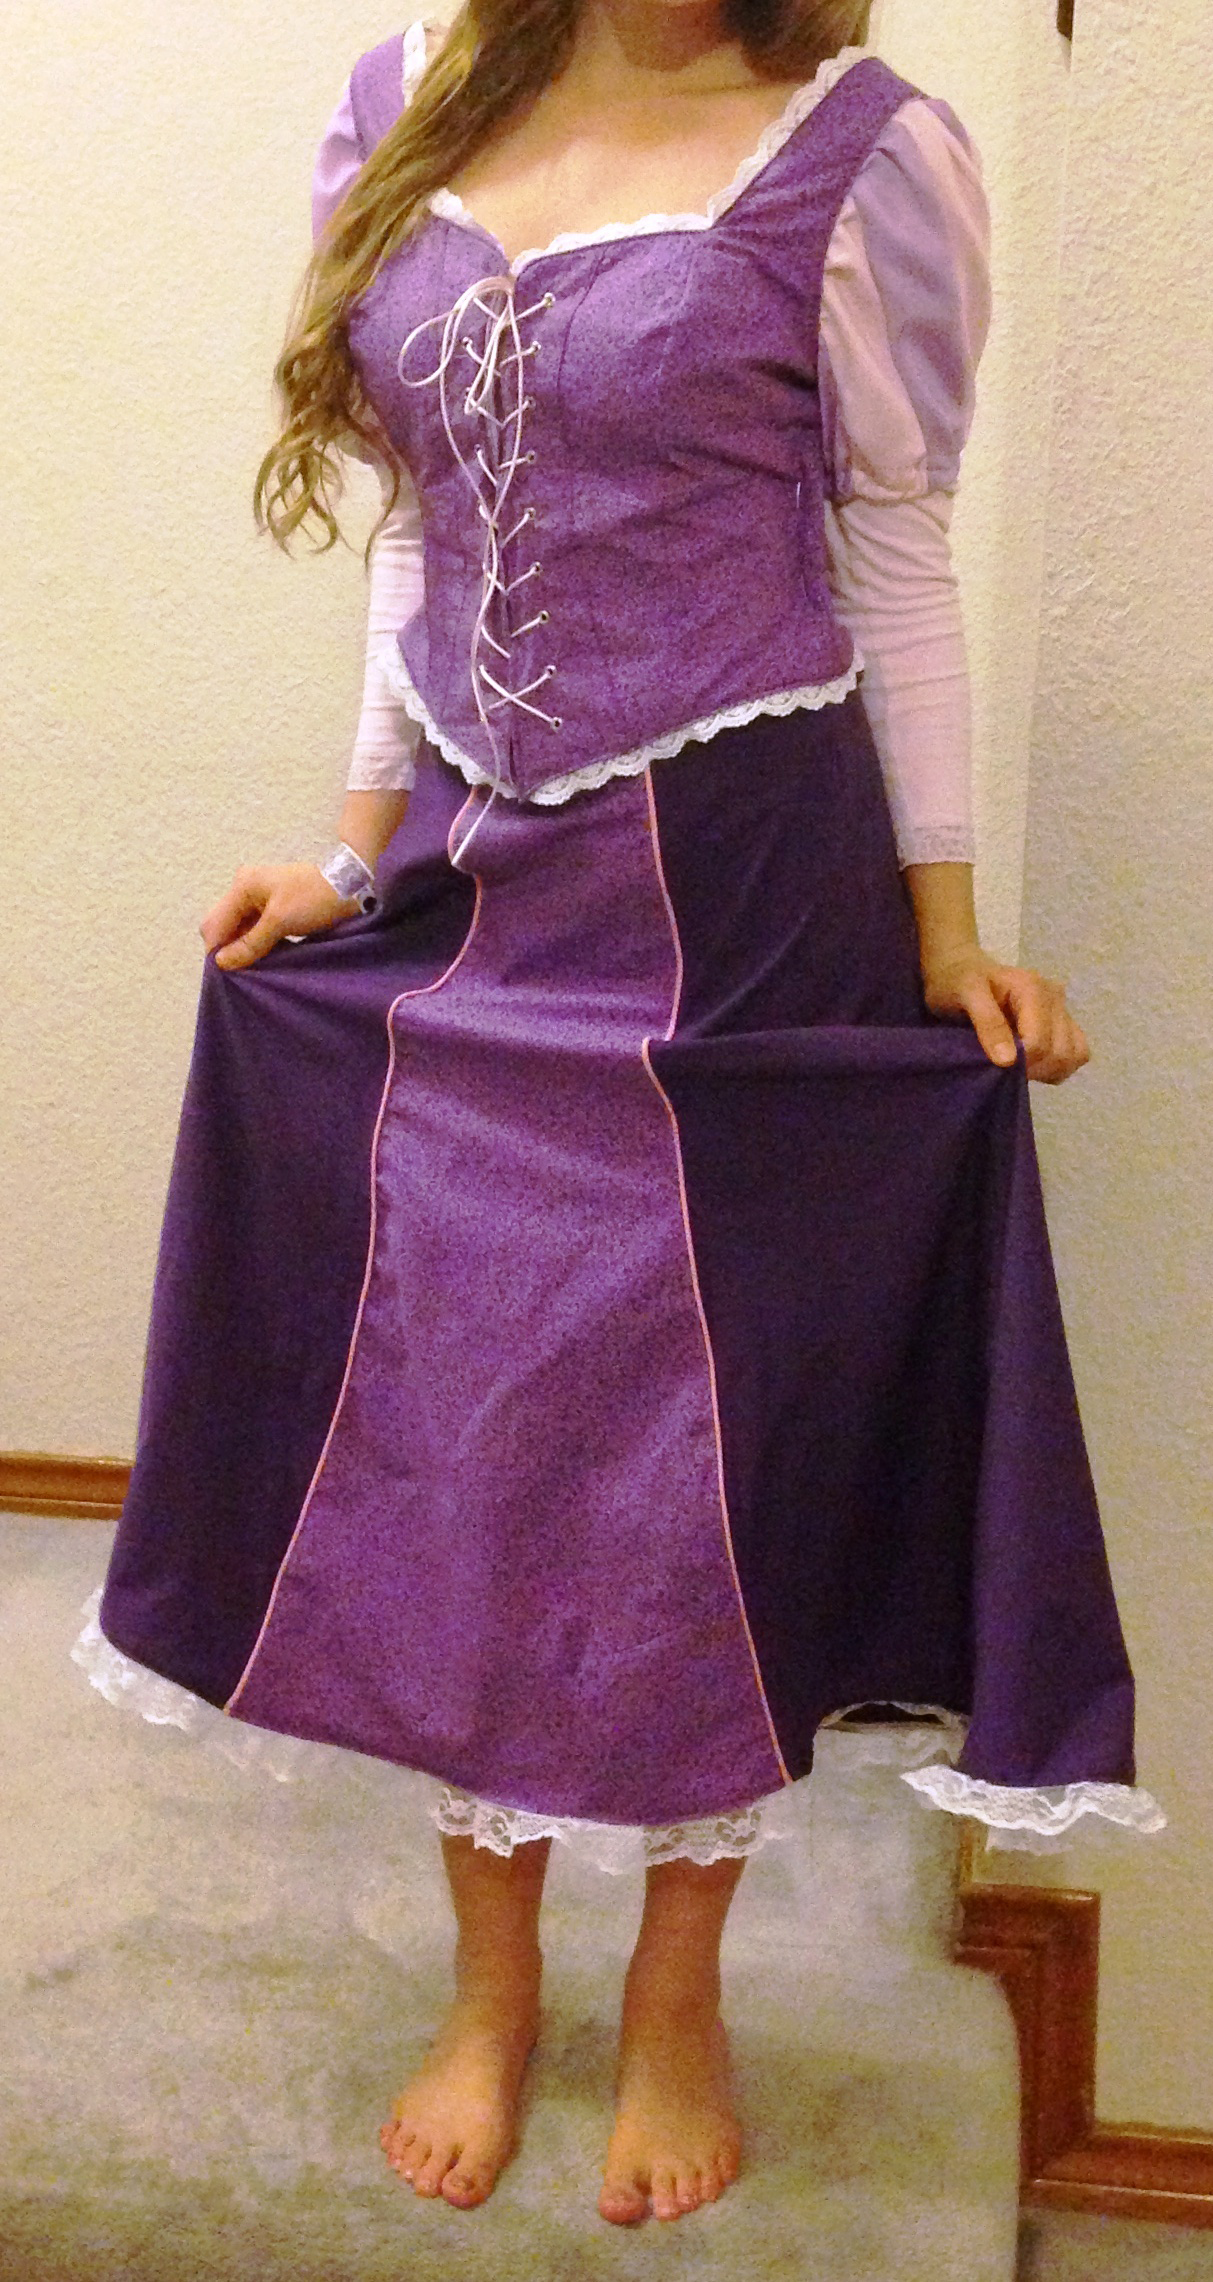 Rapunzel costume for princess party – Sewing Projects | BurdaStyle.com